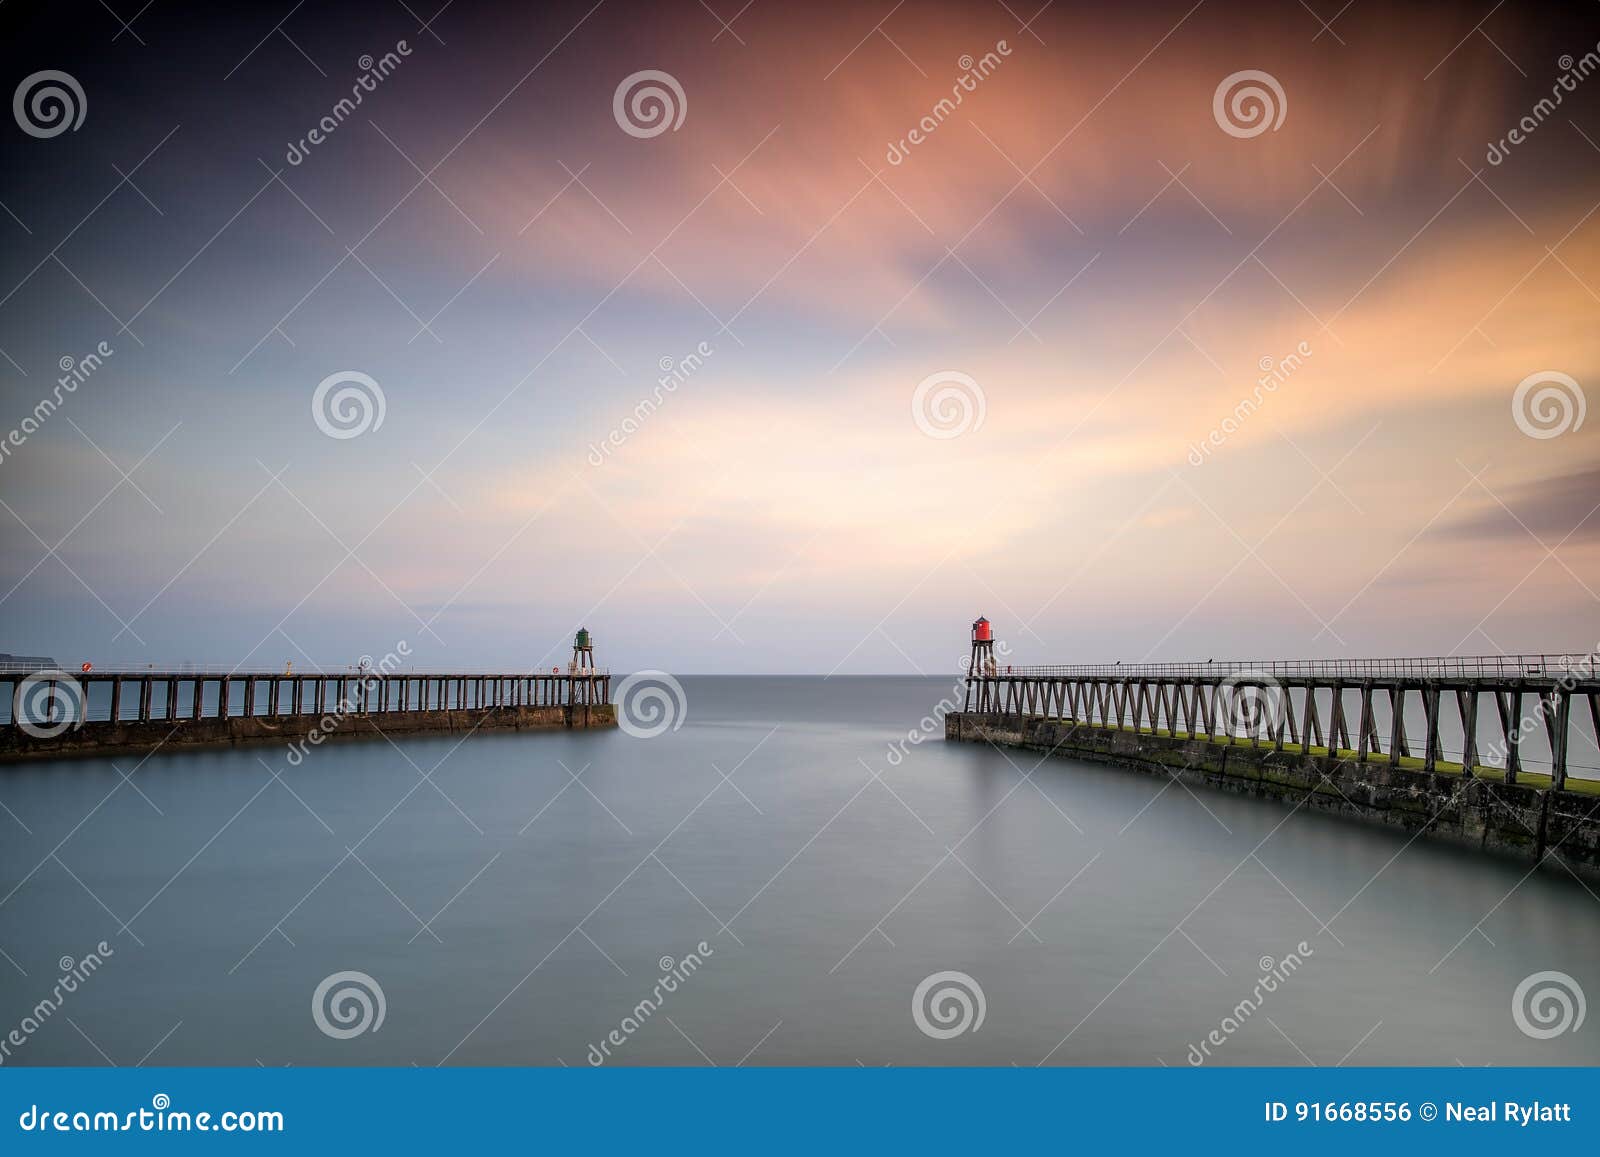 dawn, whitby harbour piers, yorkshire uk